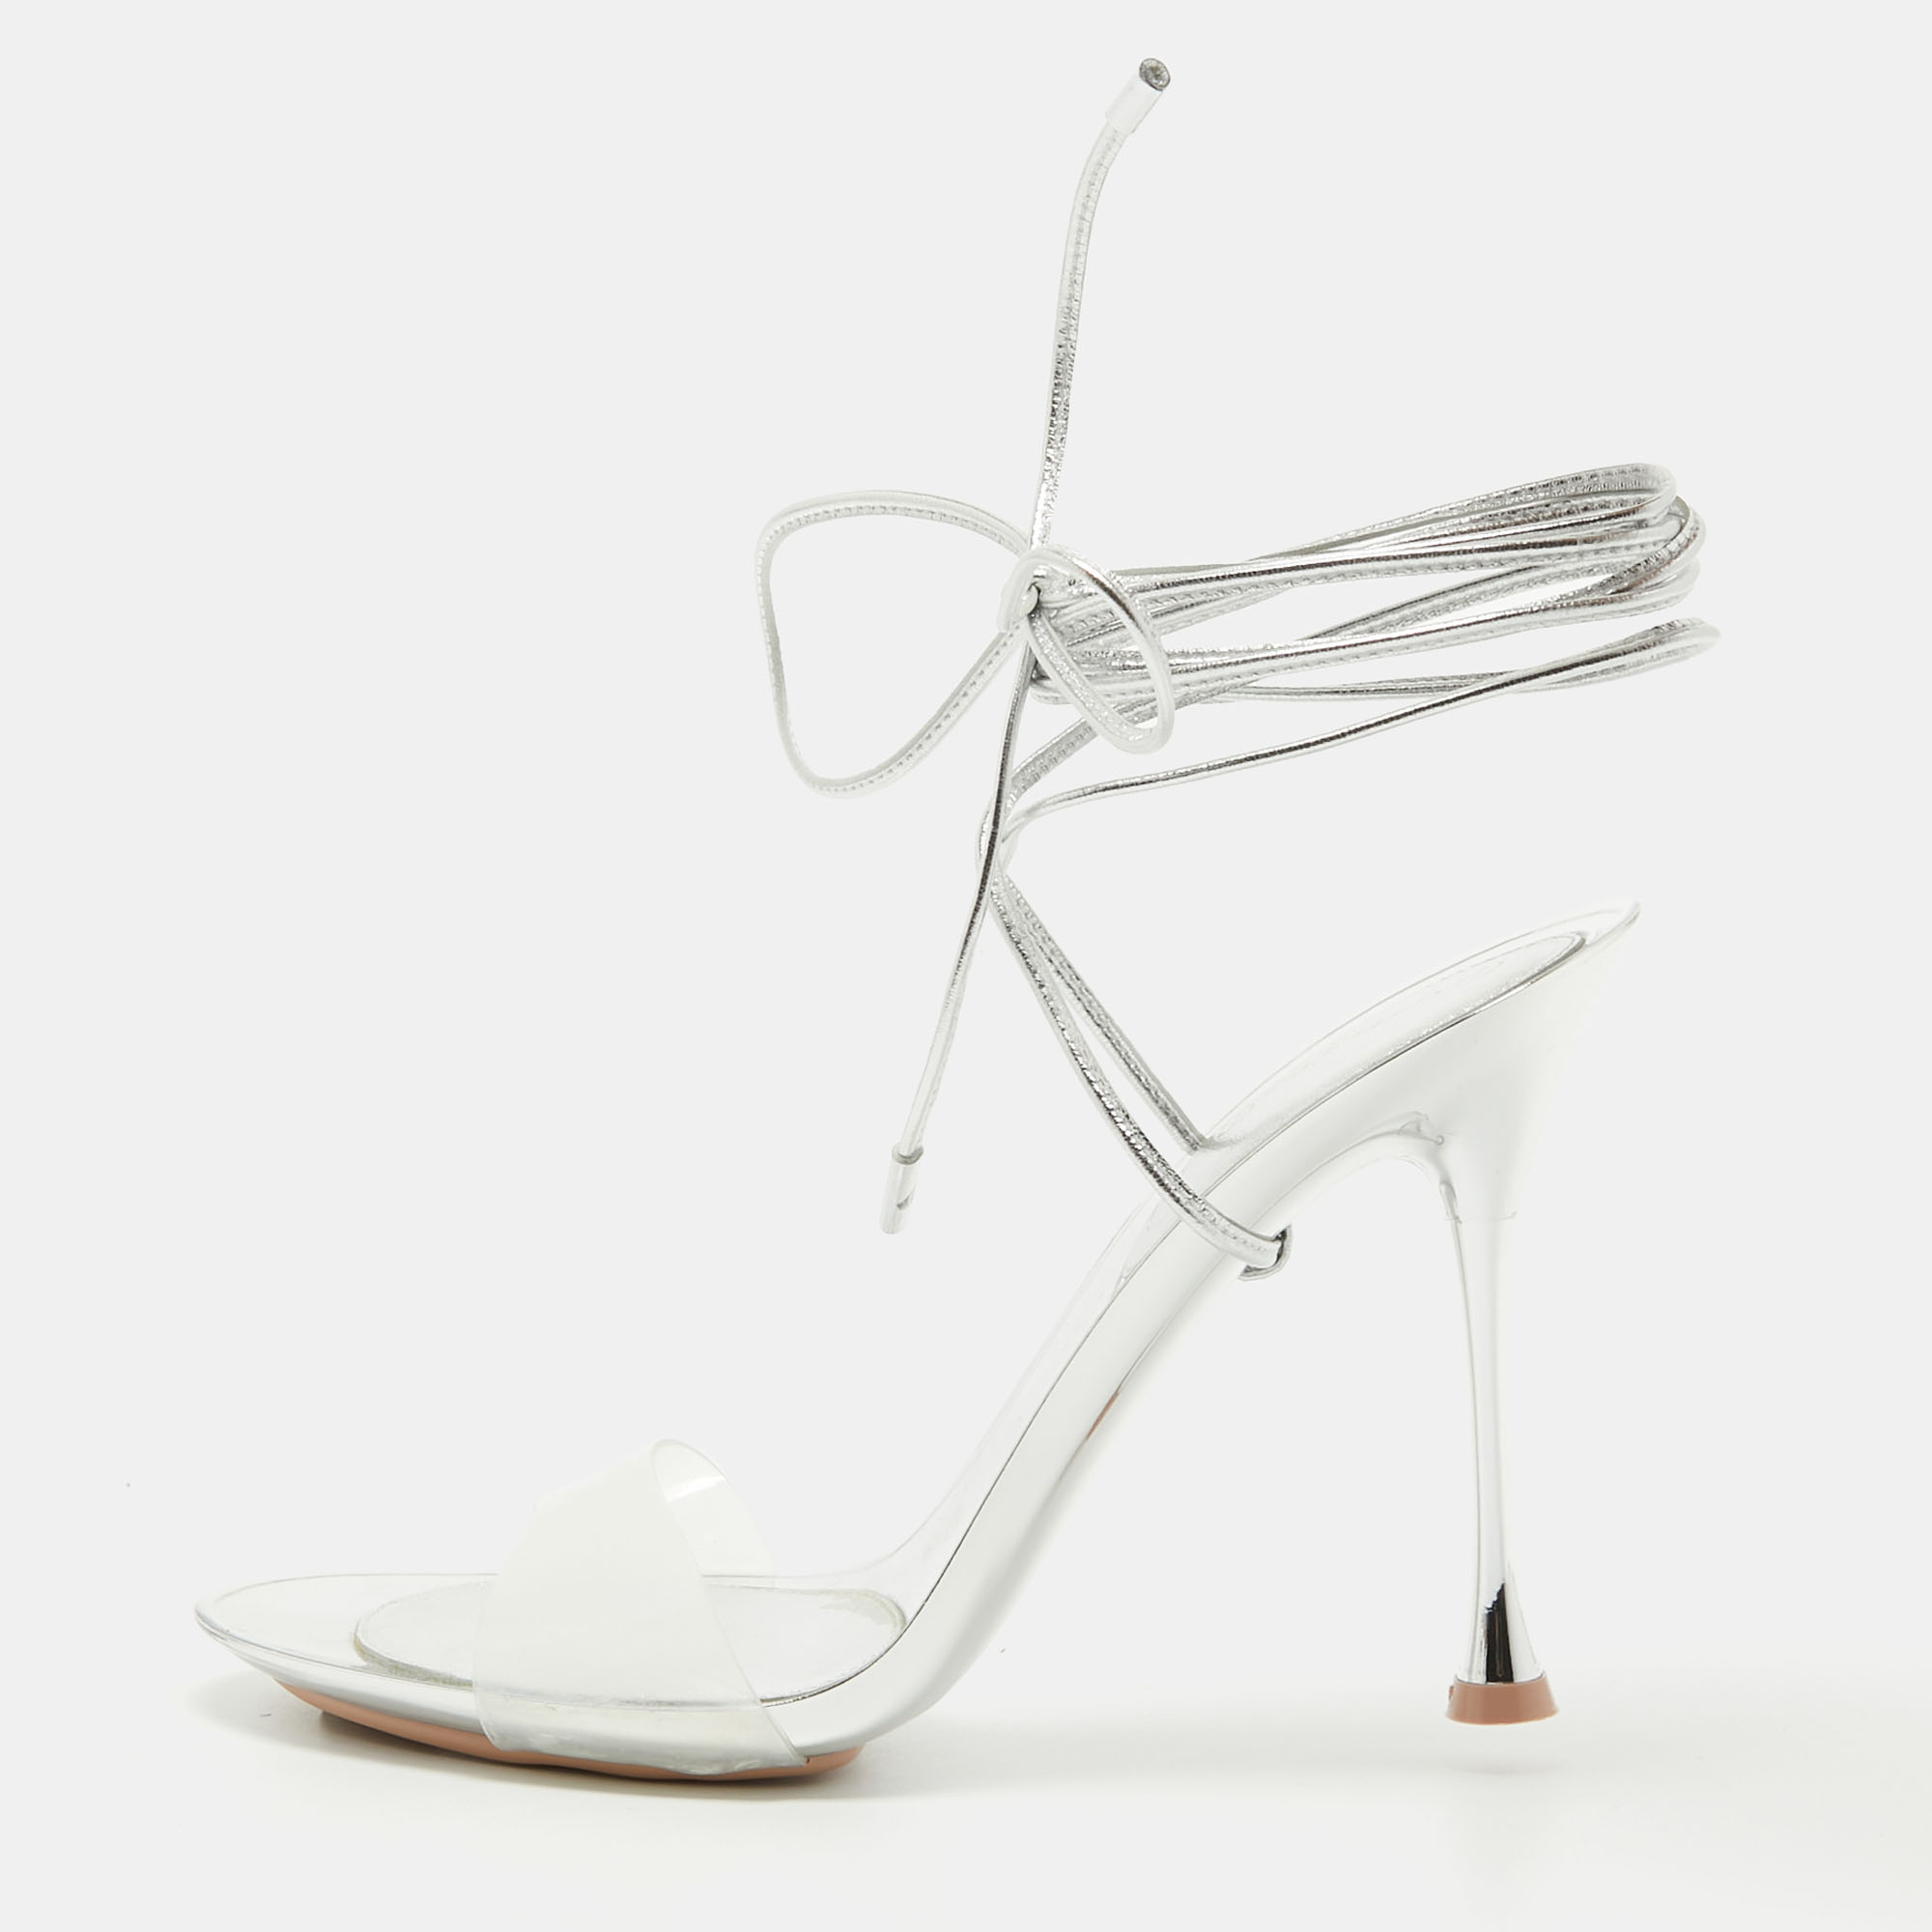 Gianvito rossi transparent pvc and silver leather spice sandals size 39.5